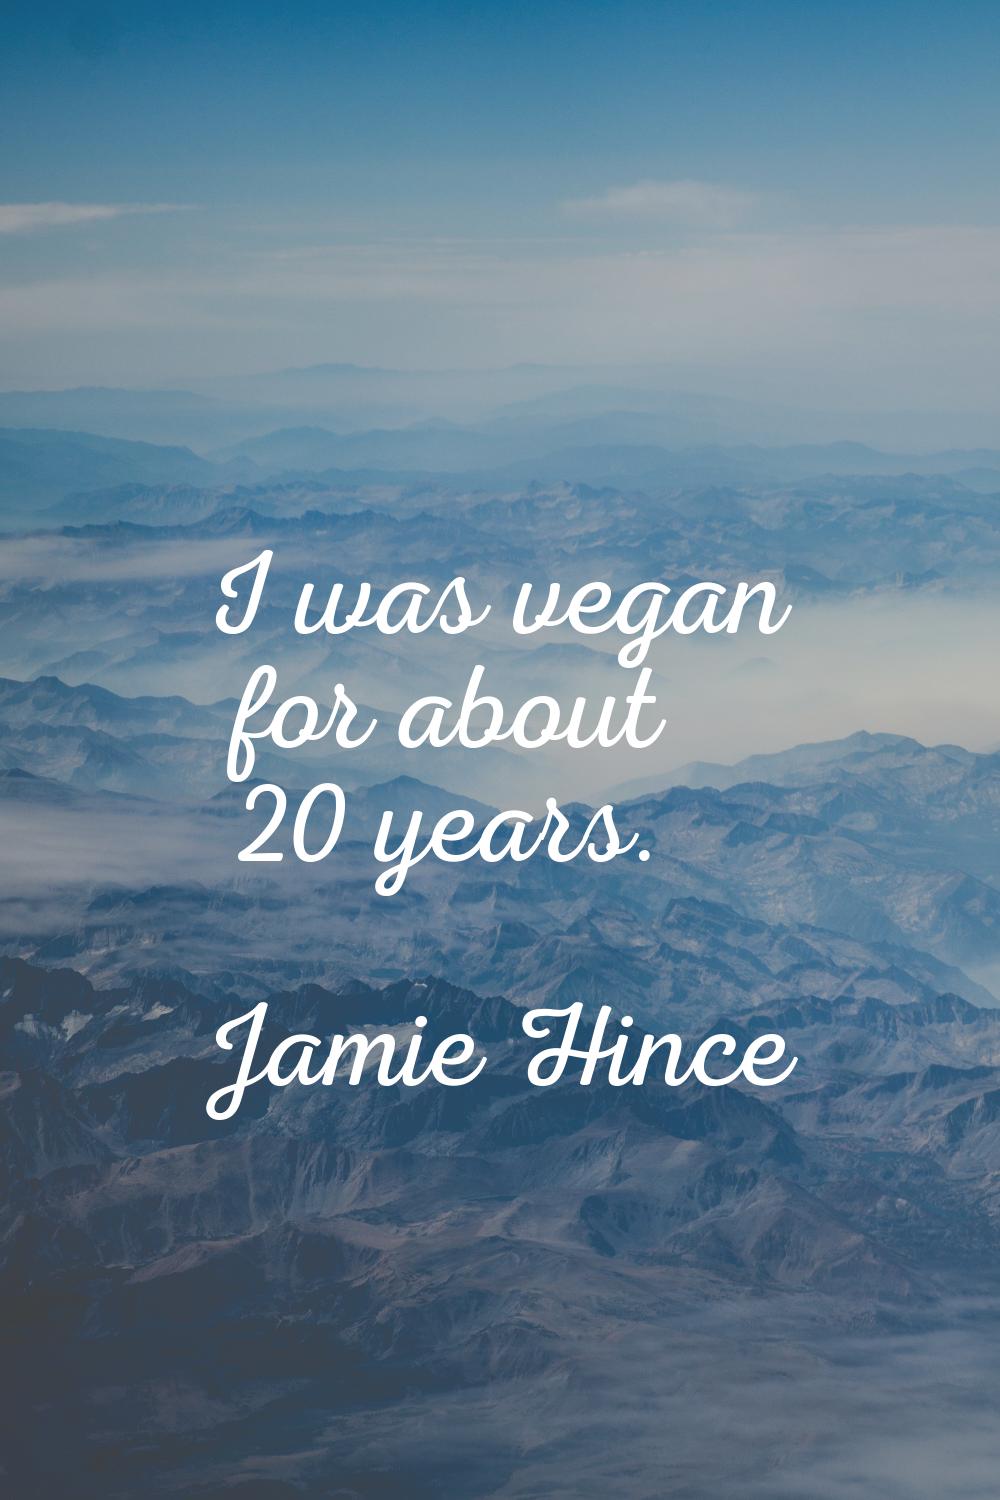 I was vegan for about 20 years.